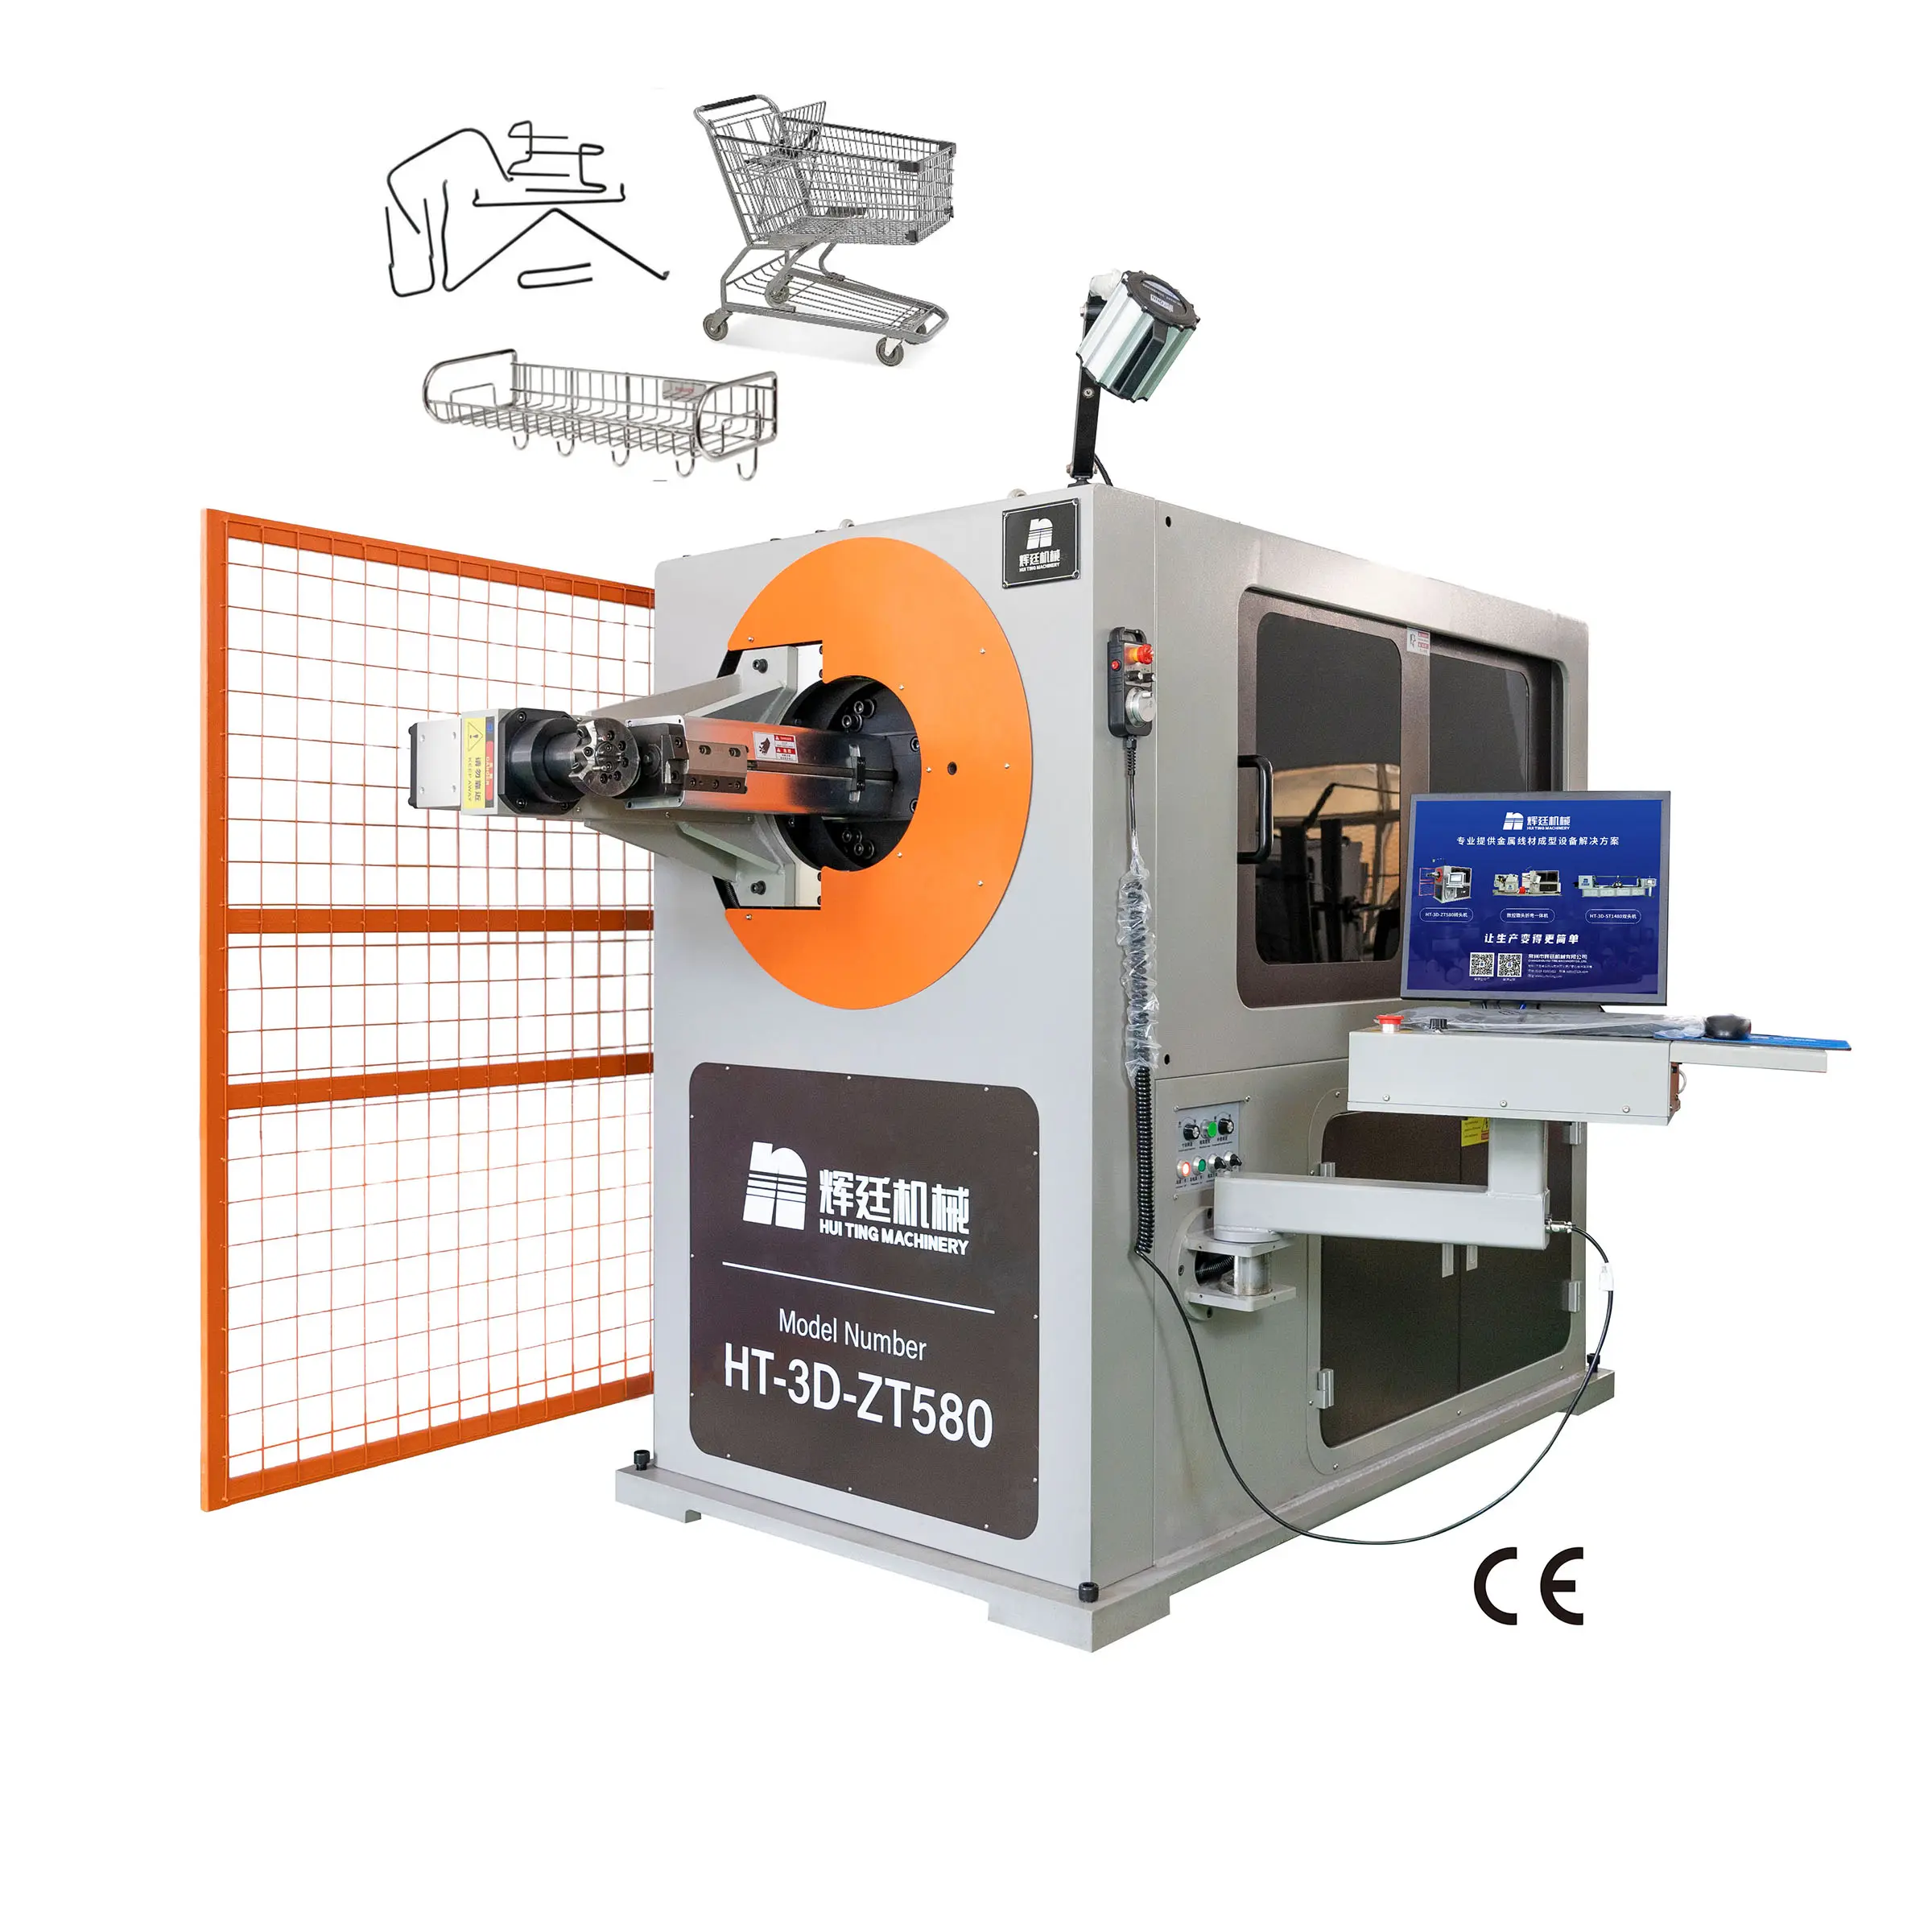 Huiting OEM/ODM maquina Bobinadora CNC 5 Axis 3mm 3D CNC wire bending machine wire making machine and wire forming machine